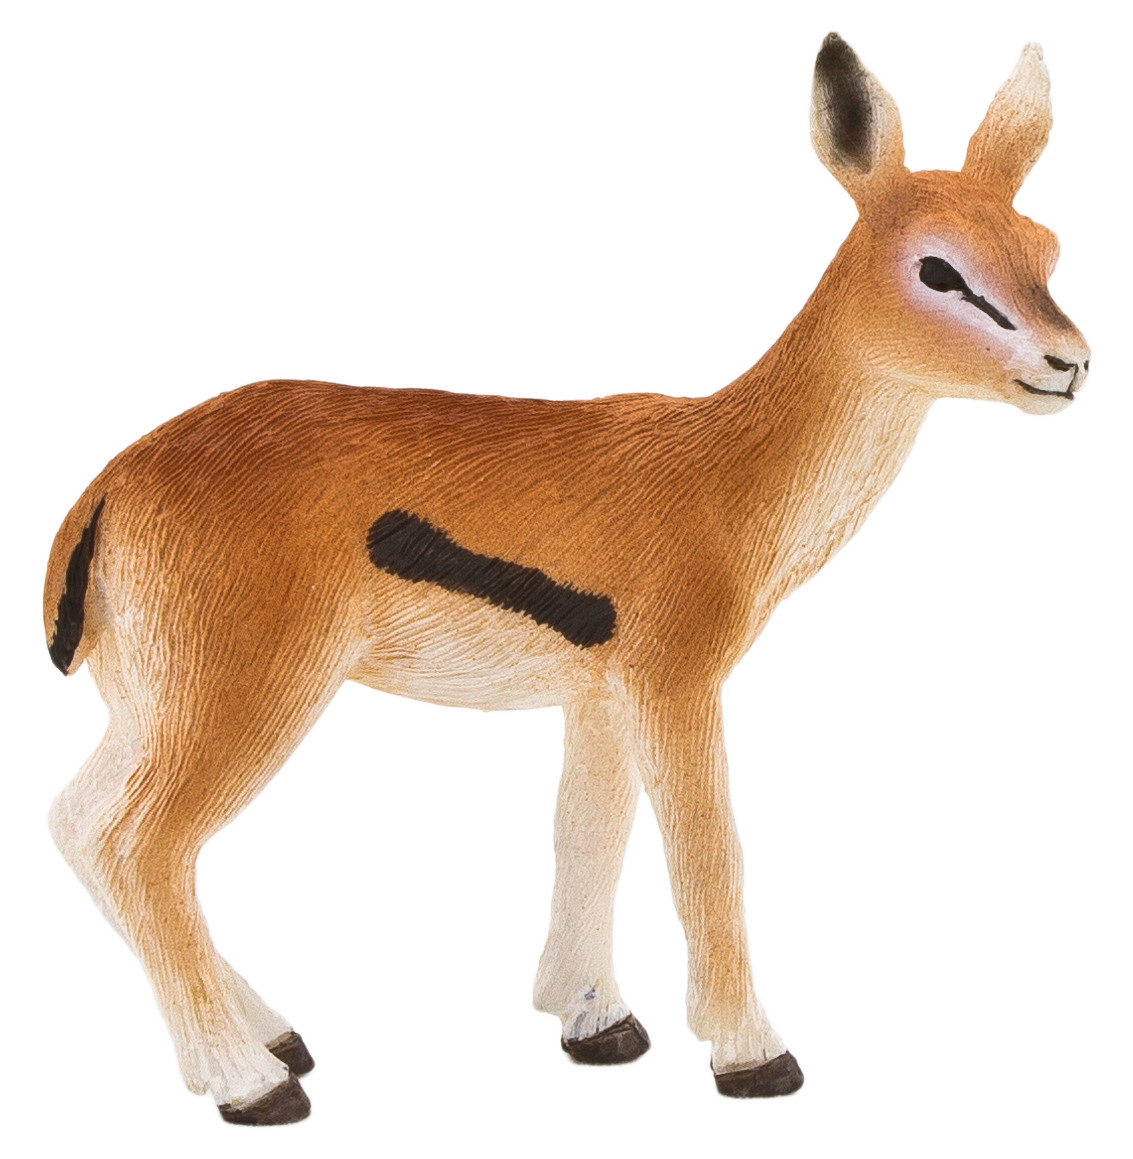 Gazelle Antelope PNG HQ Picture